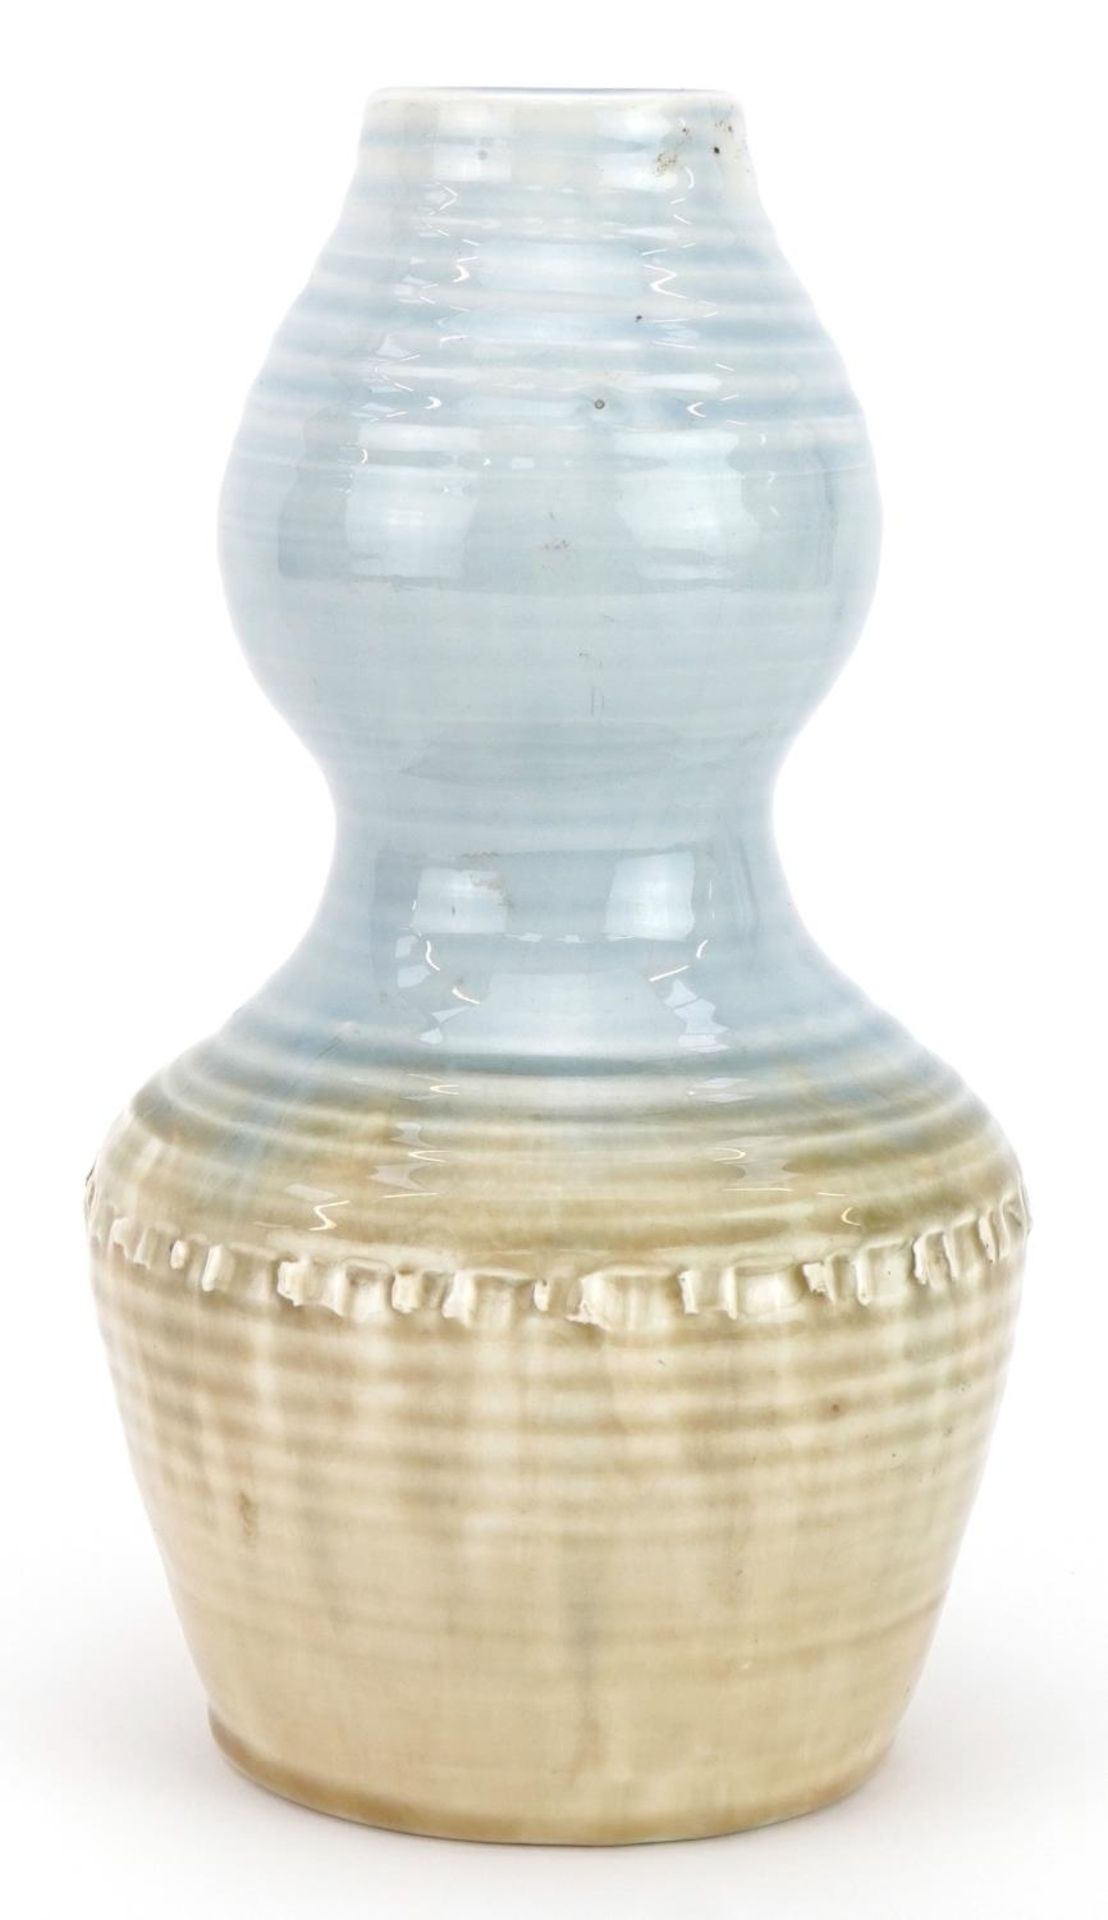 William Moorcroft double gourd vase having a pale blue and beige glaze from the Natural range, 23.